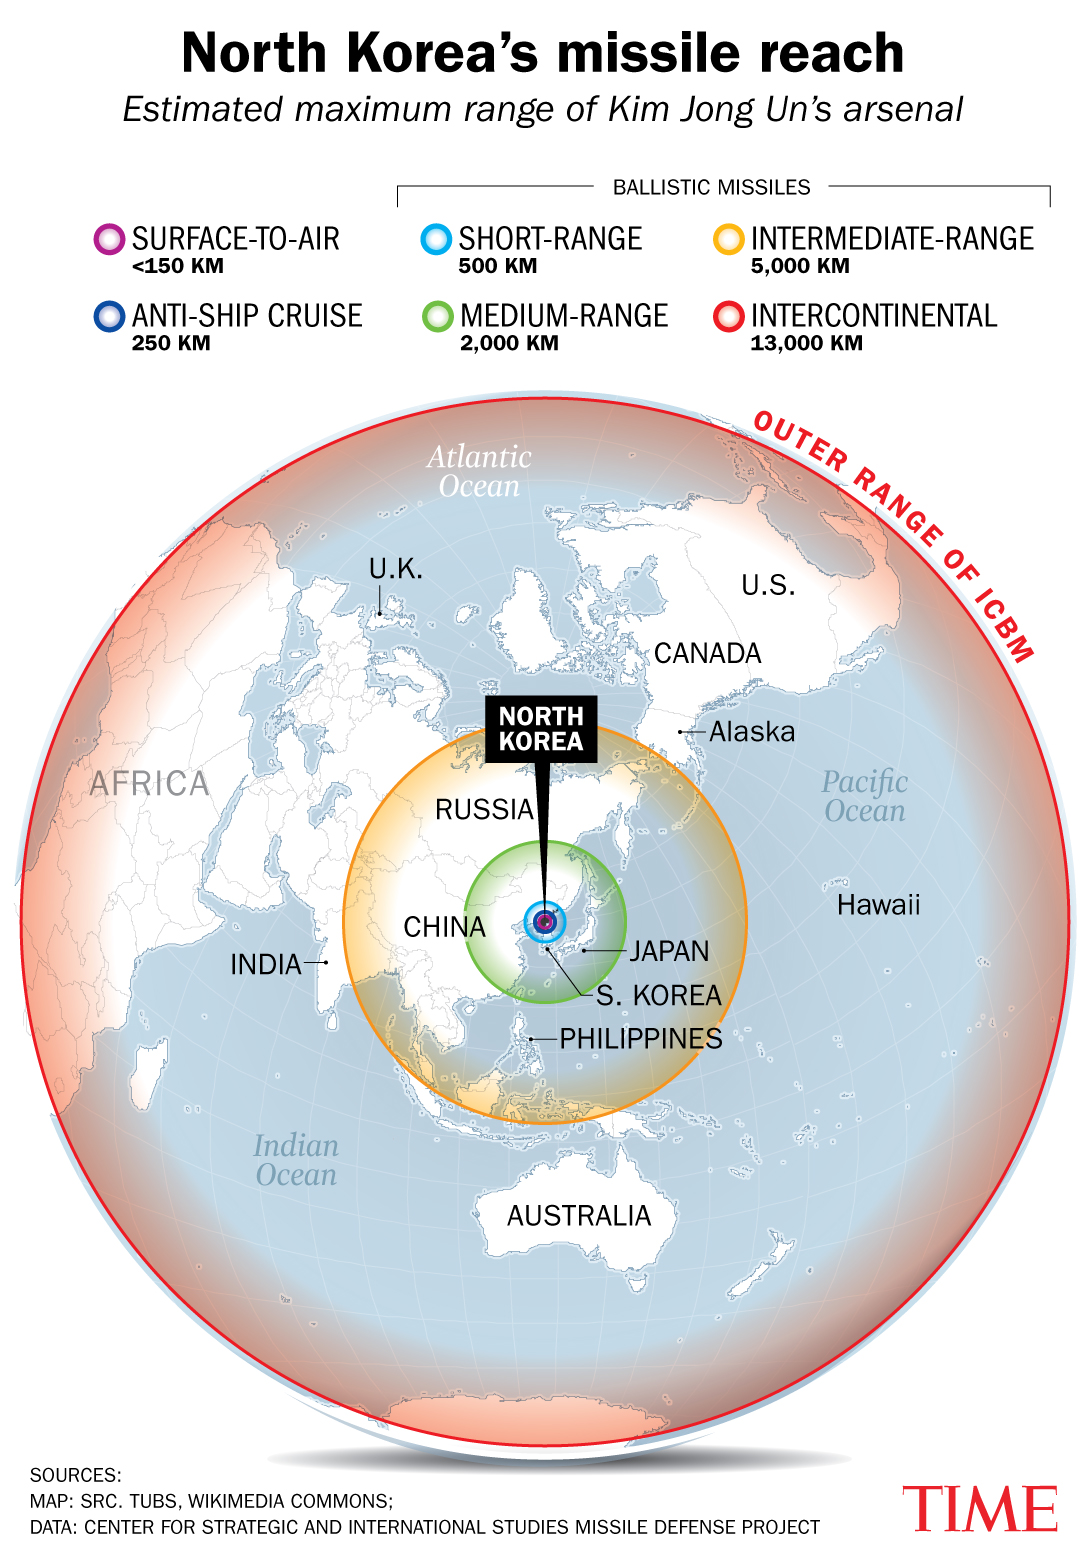 A map showing the reach of North Korea's missiles: Surface-to-air (